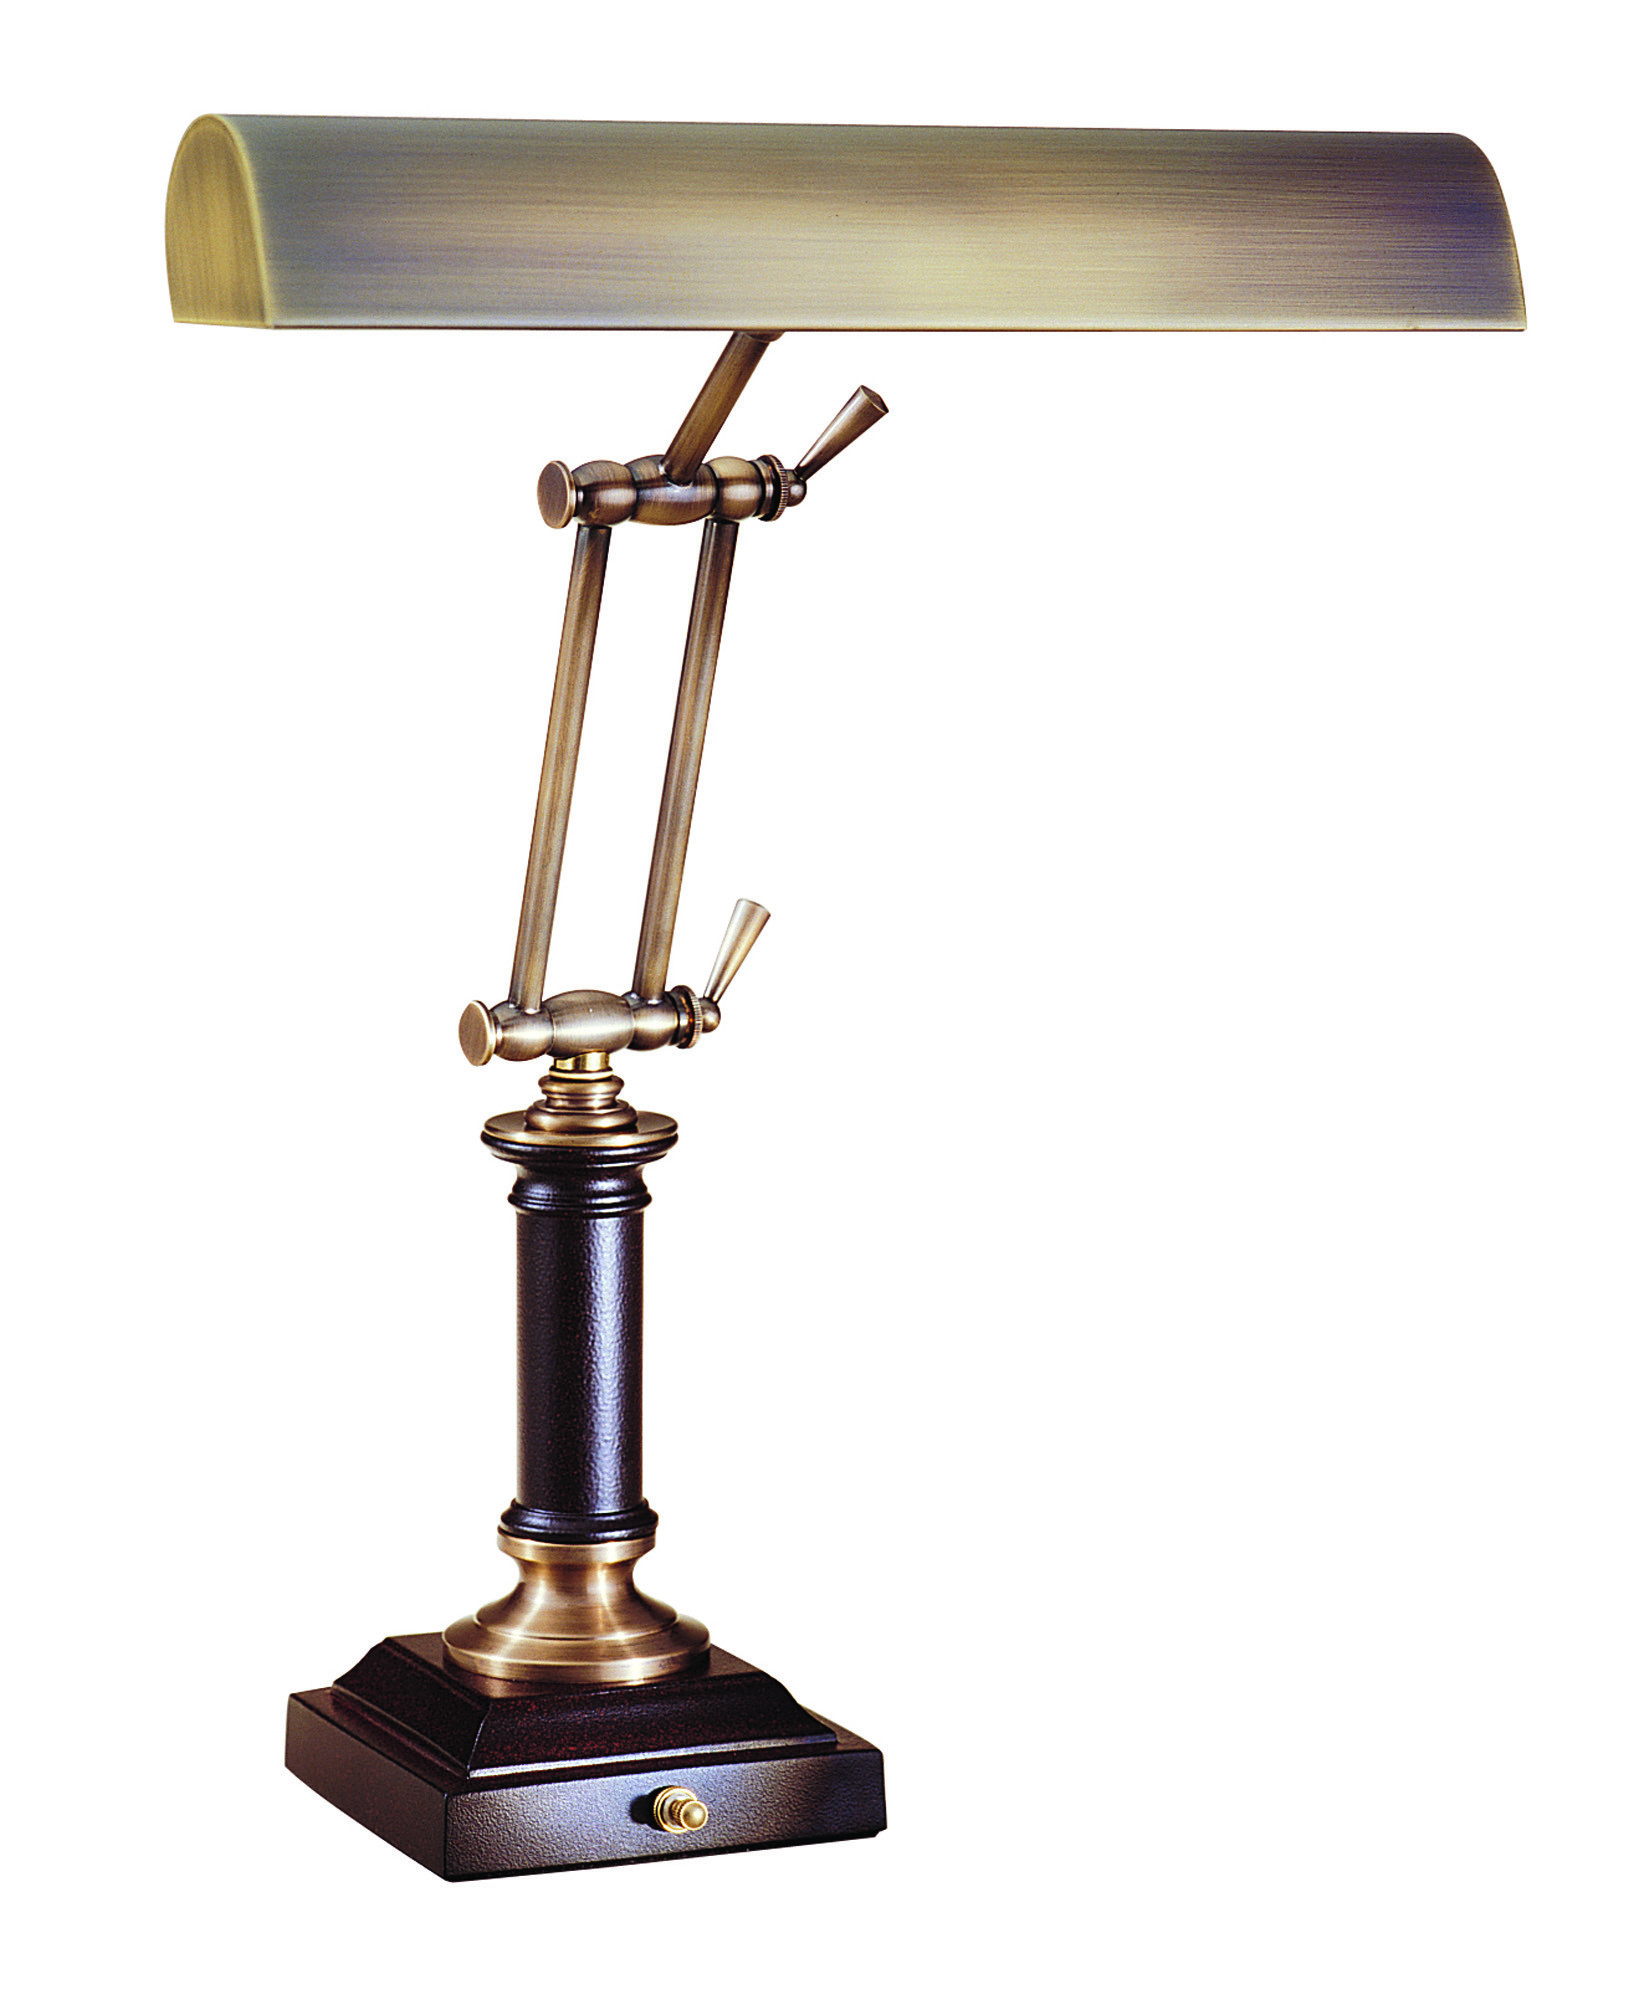 House of Troy P14-233-C71 16-1/2-Inch Portable Desk/Piano Lamp, Antique Brass and Chestnut Bronze